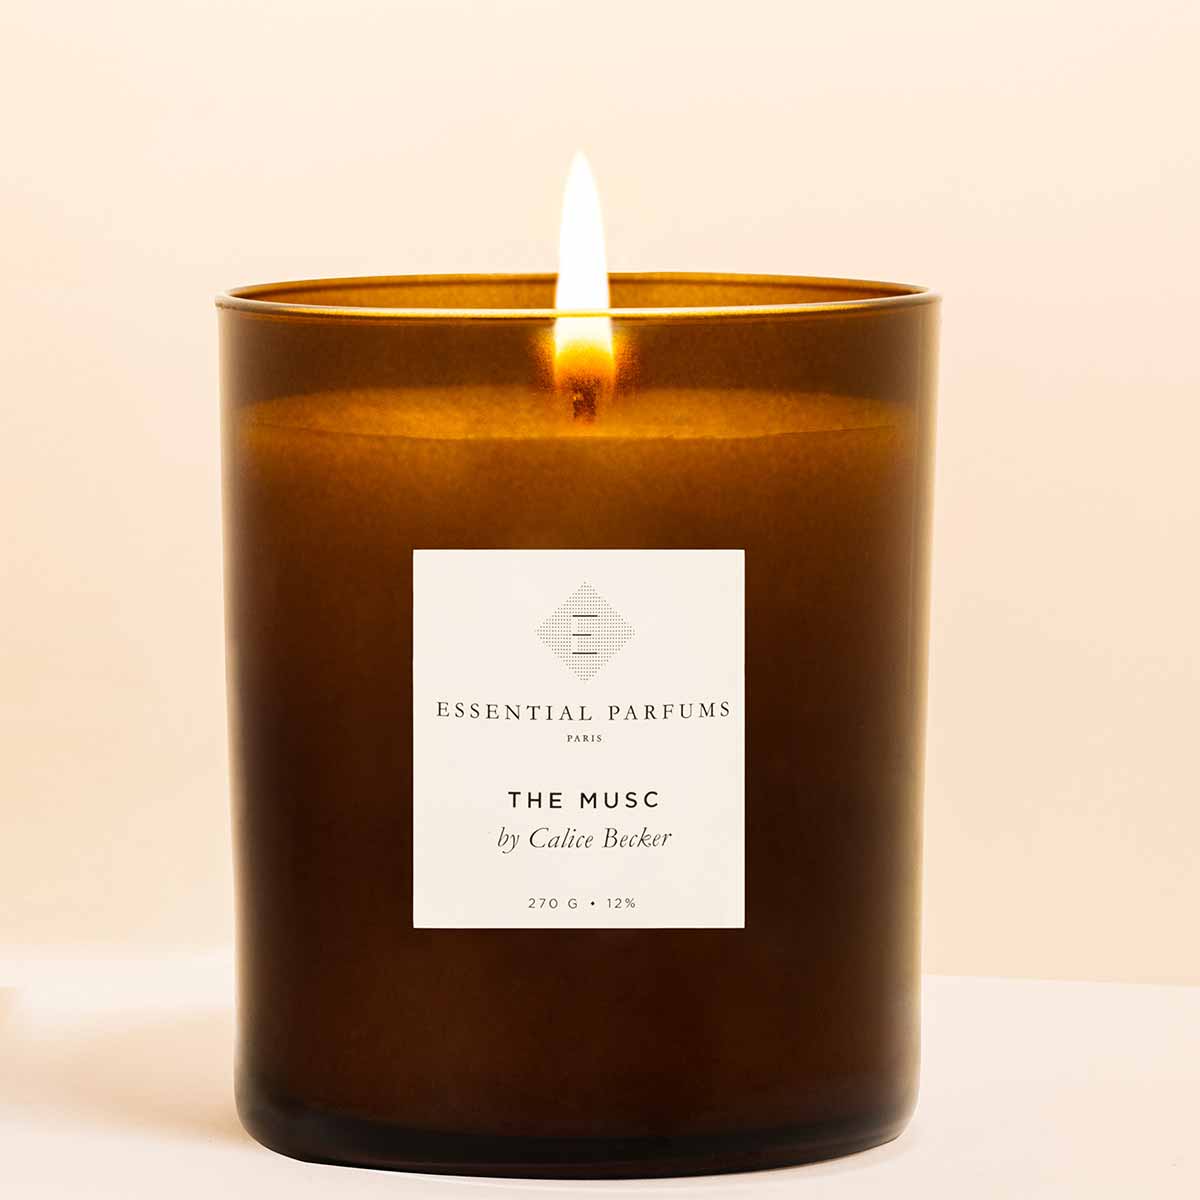 ESSENTIAL PARFUMS - THE MUSC CANDLE